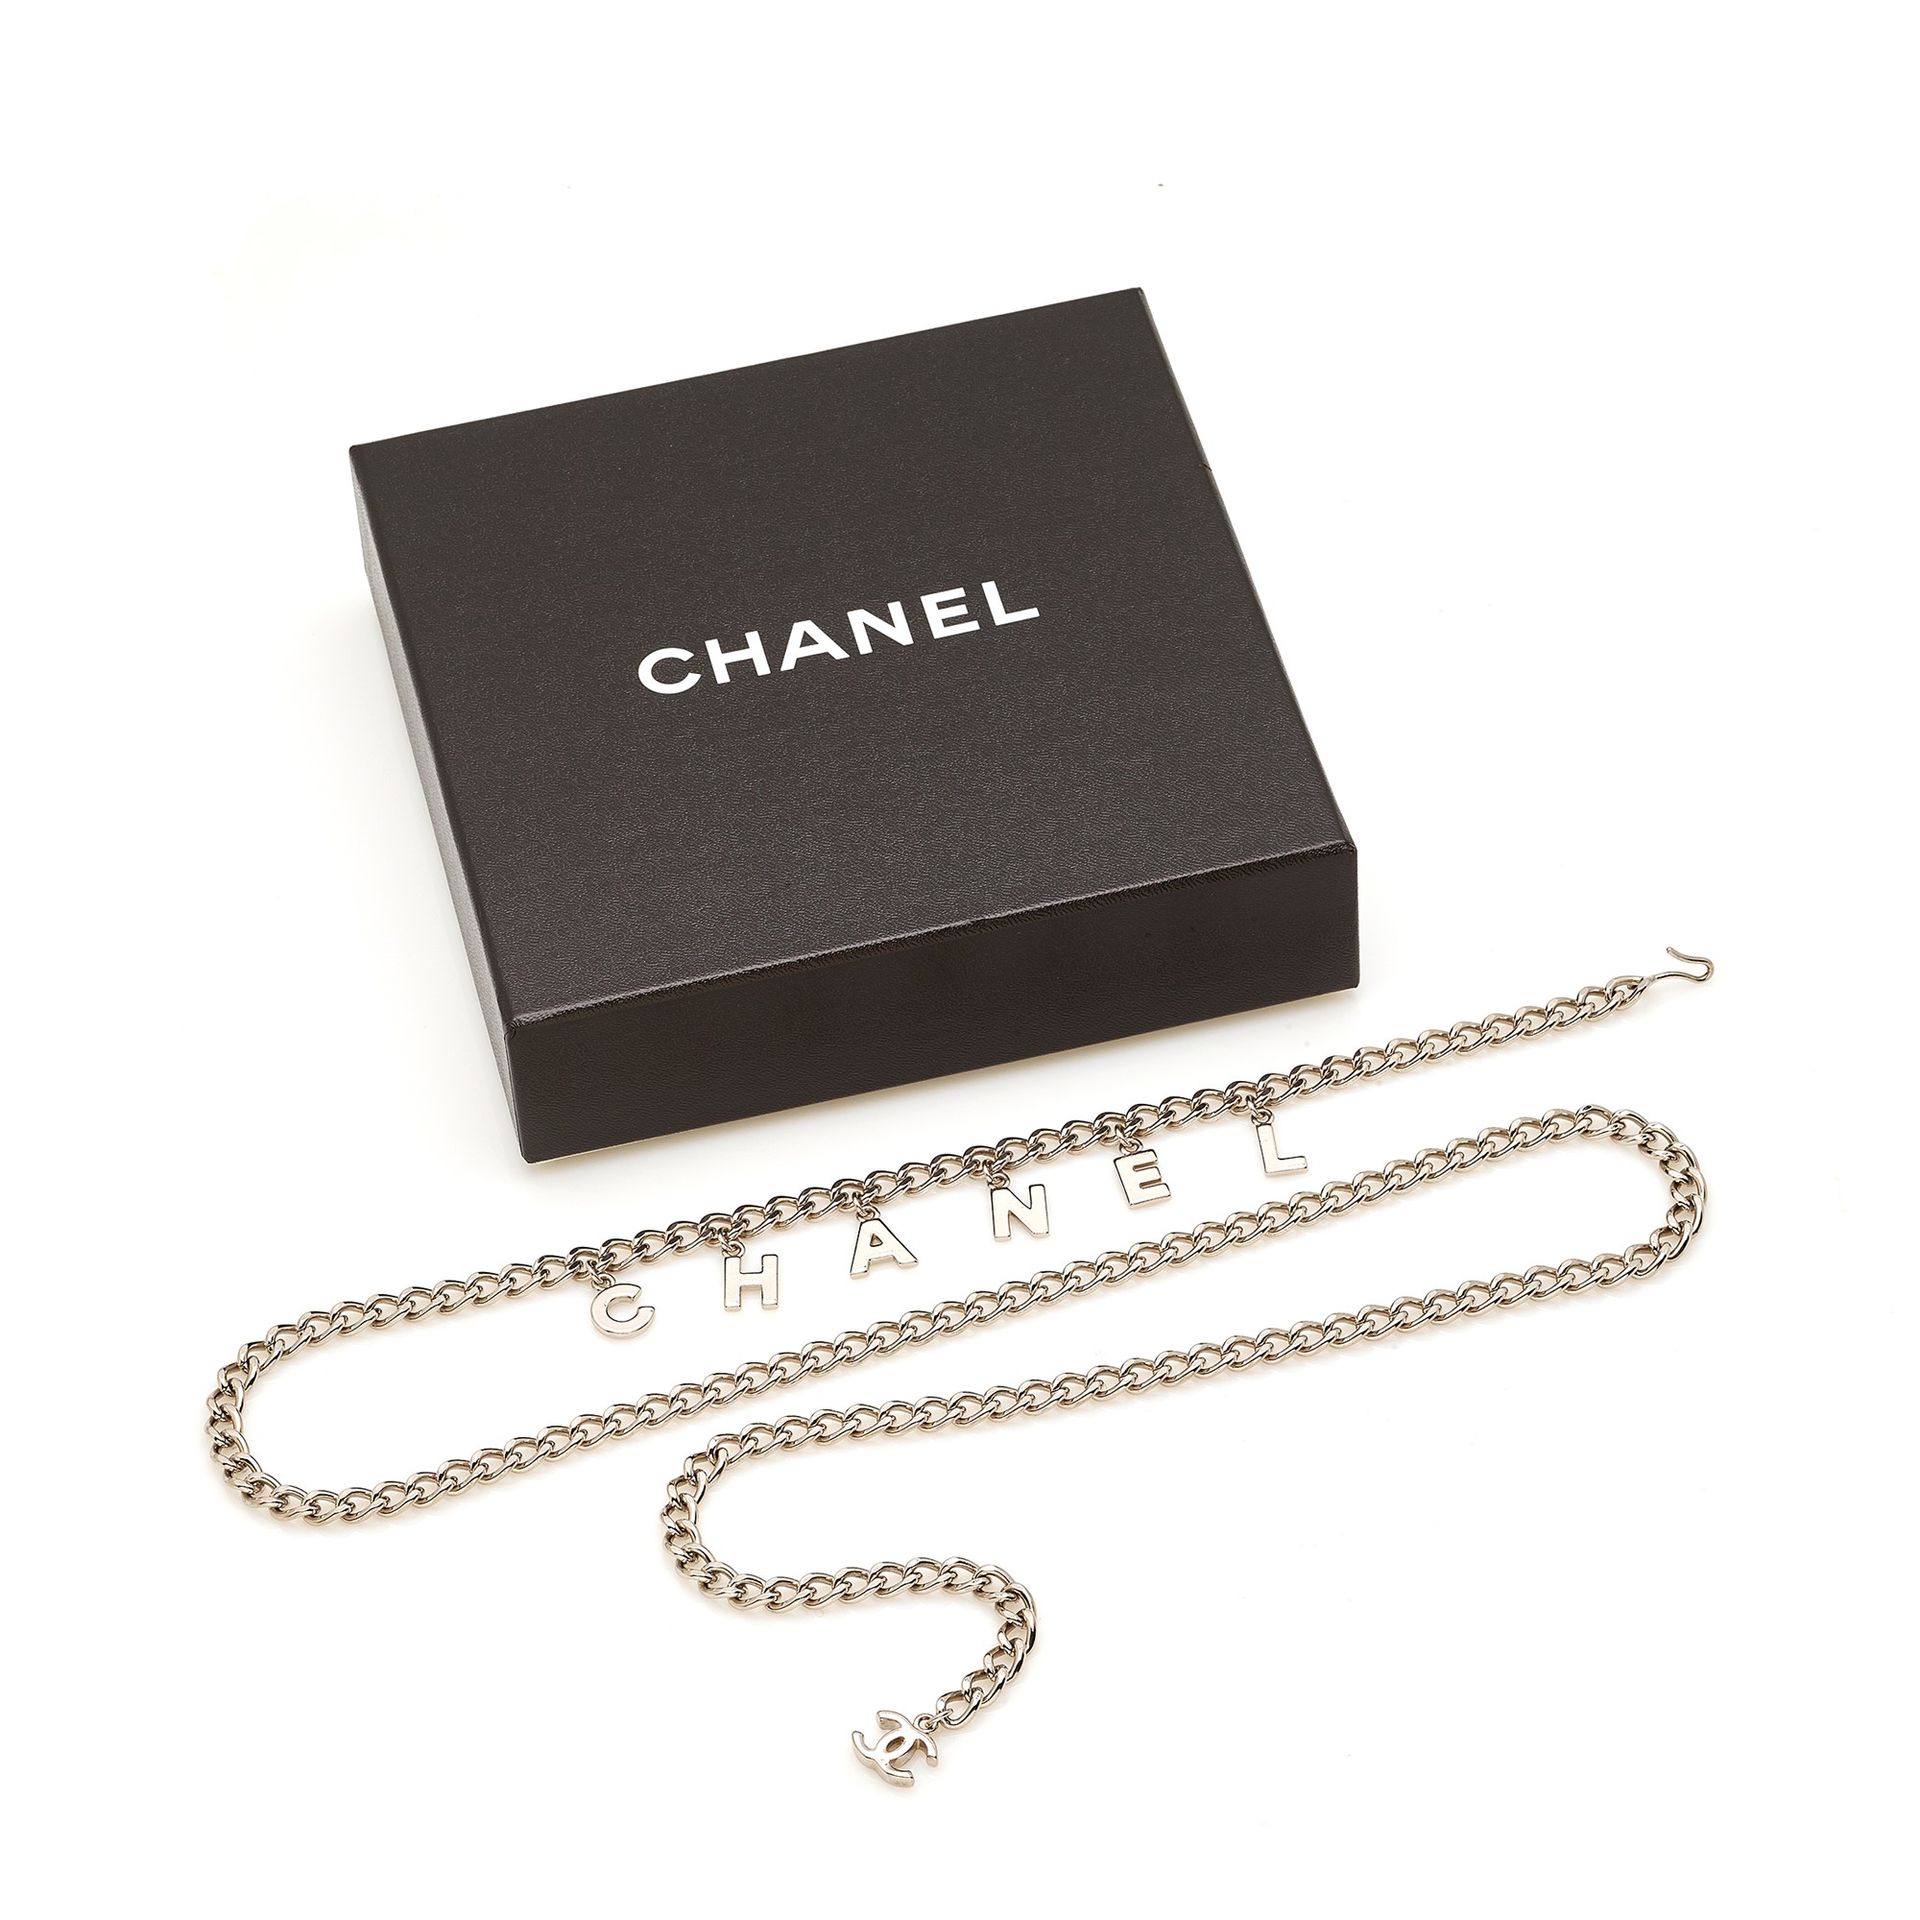 Chanel belt in silver-plated metal with letters making u…